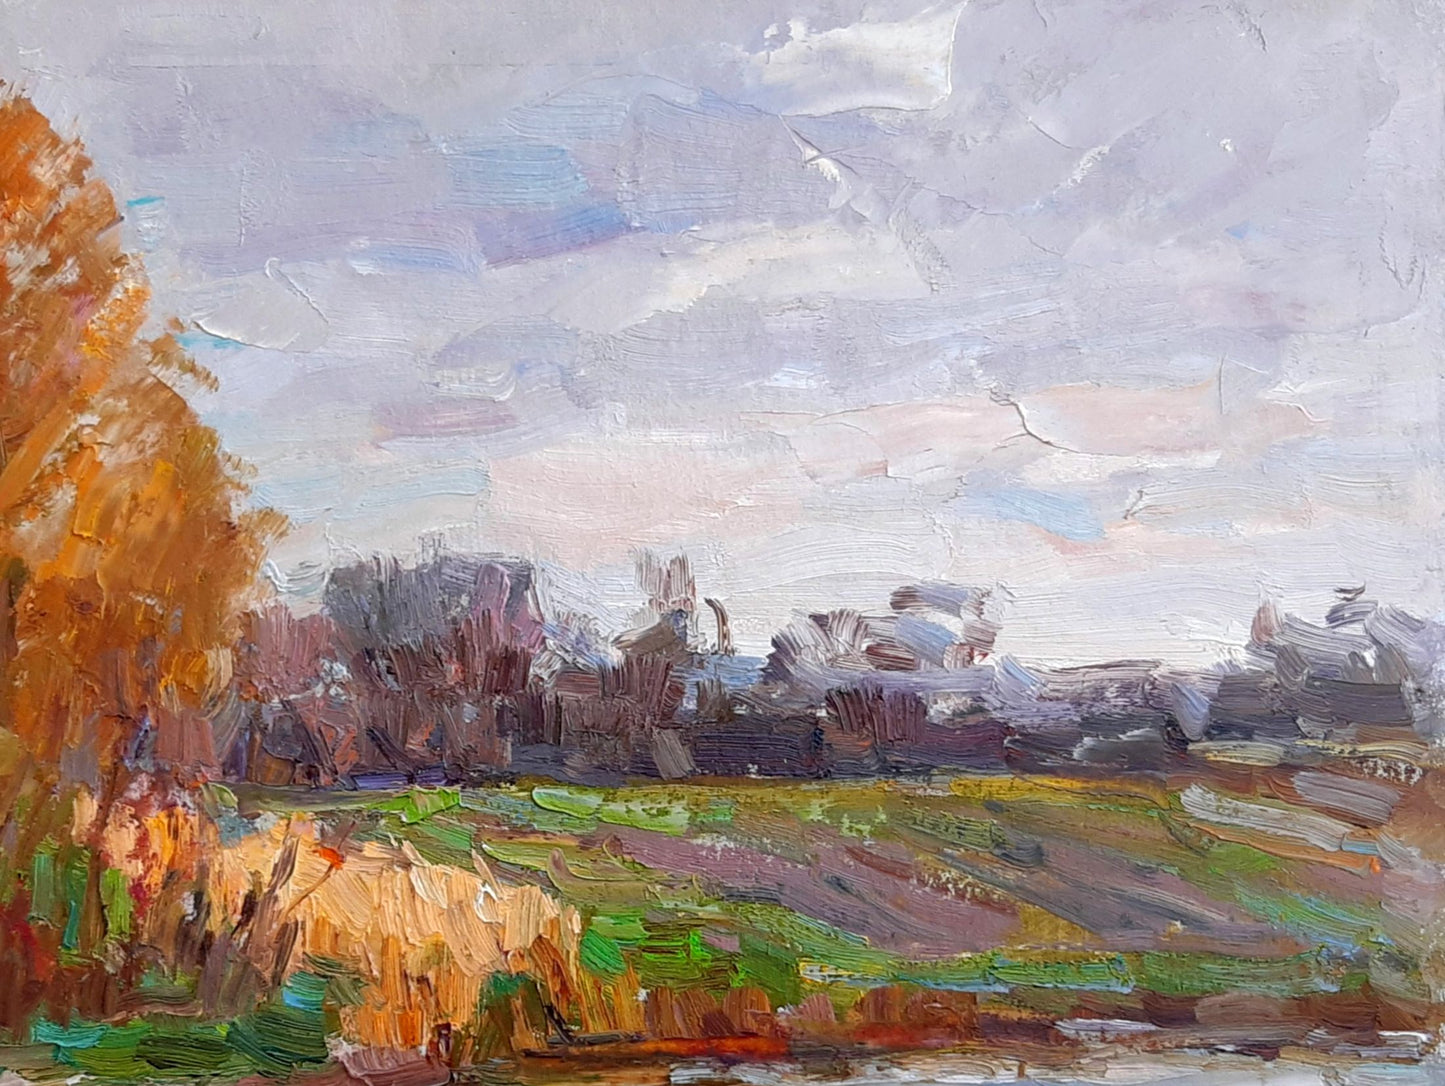 October Morning by Vyacheslav Pereta, an oil painting